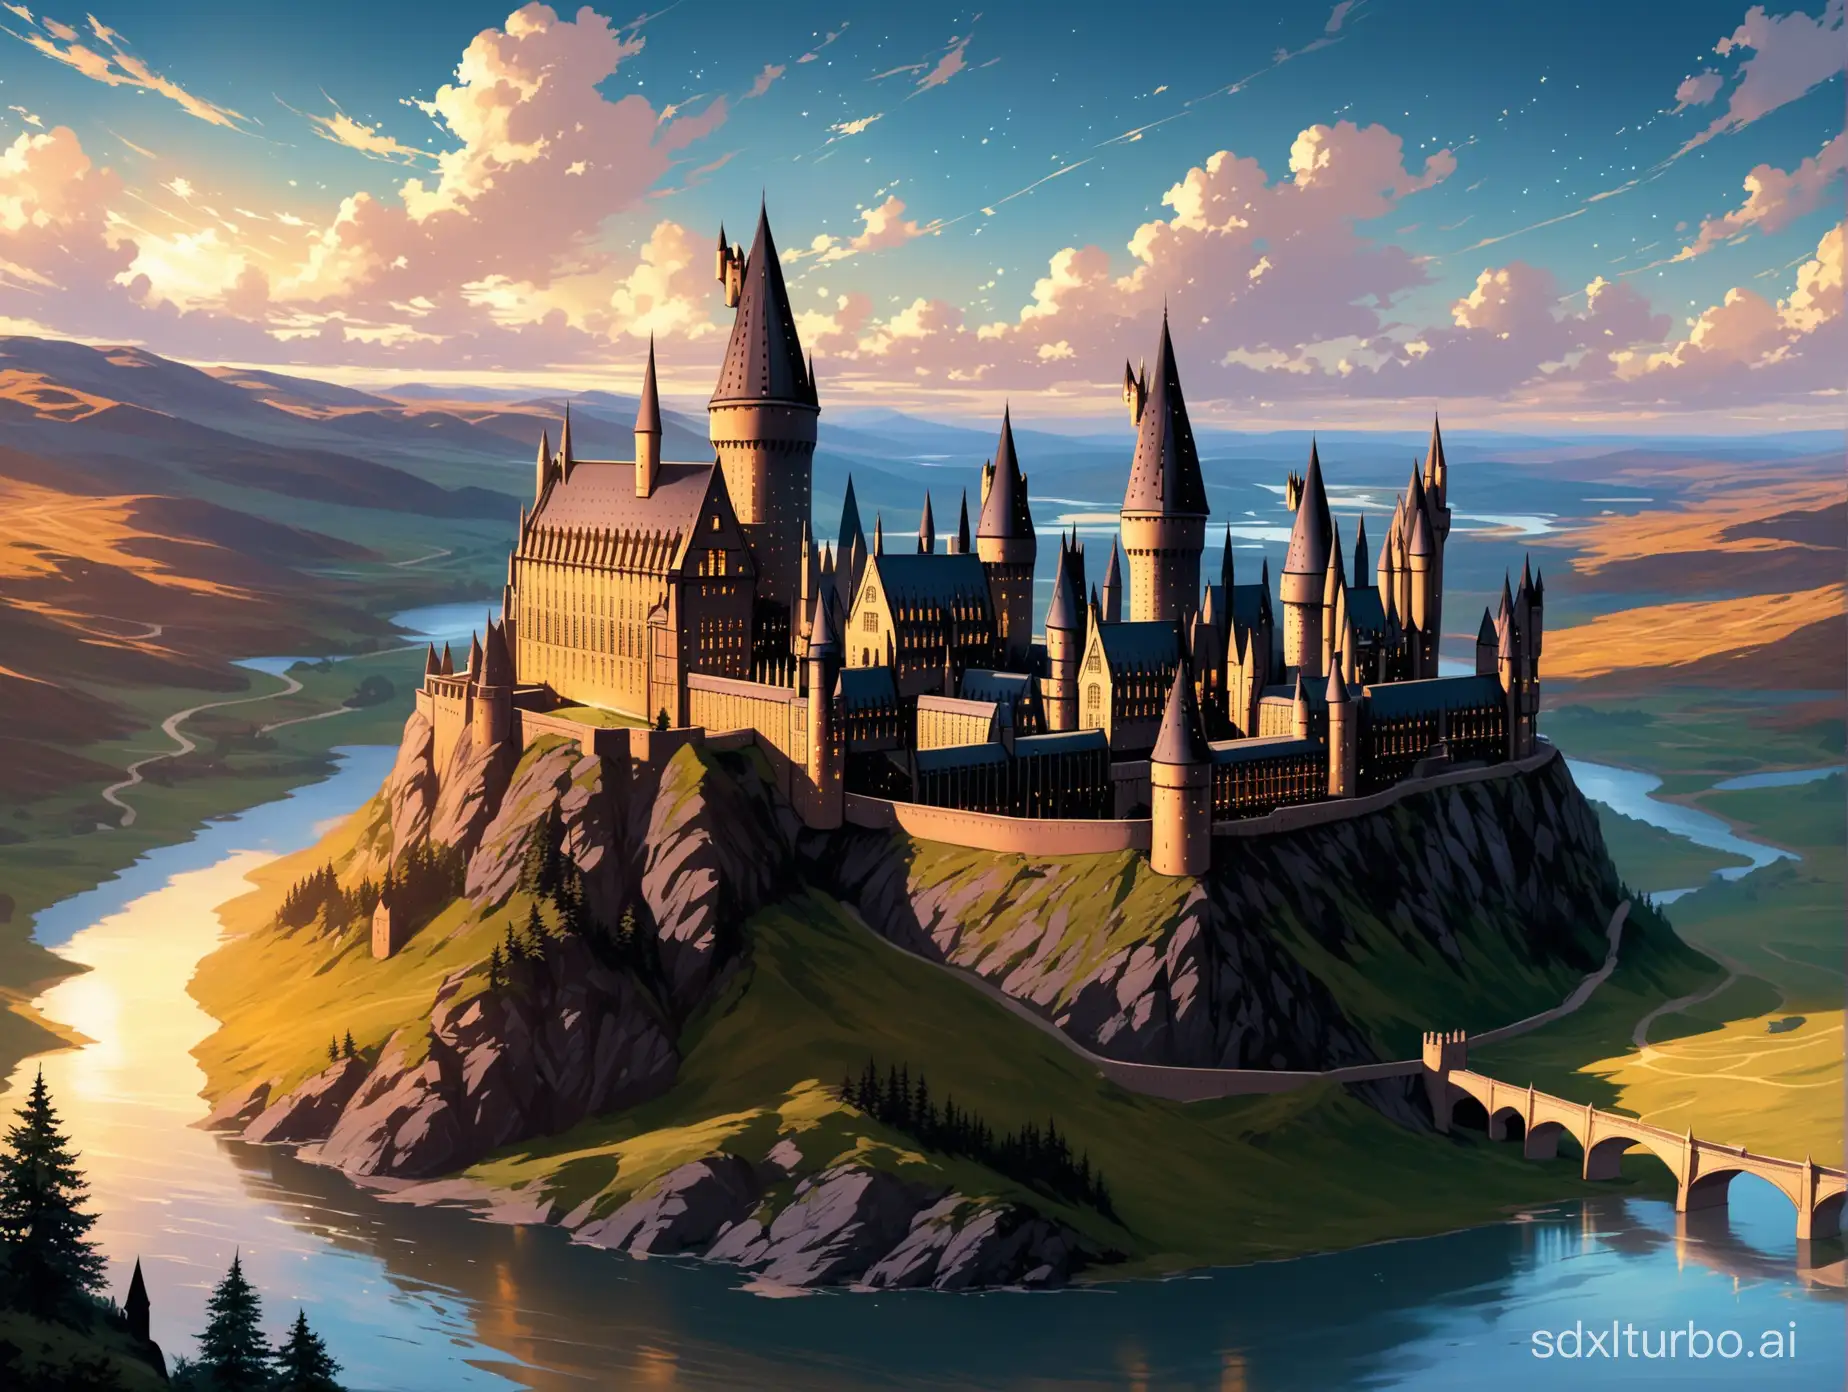 Hogwarts School of Witchcraft and Wizardry in the United Kingdom